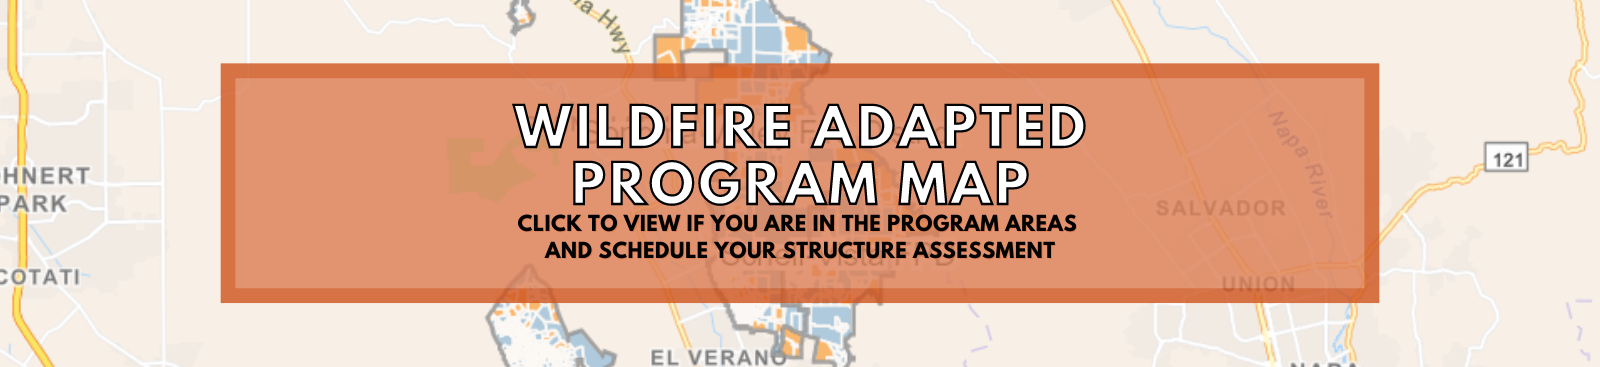 Wildfire Adapted Program Map Viewer